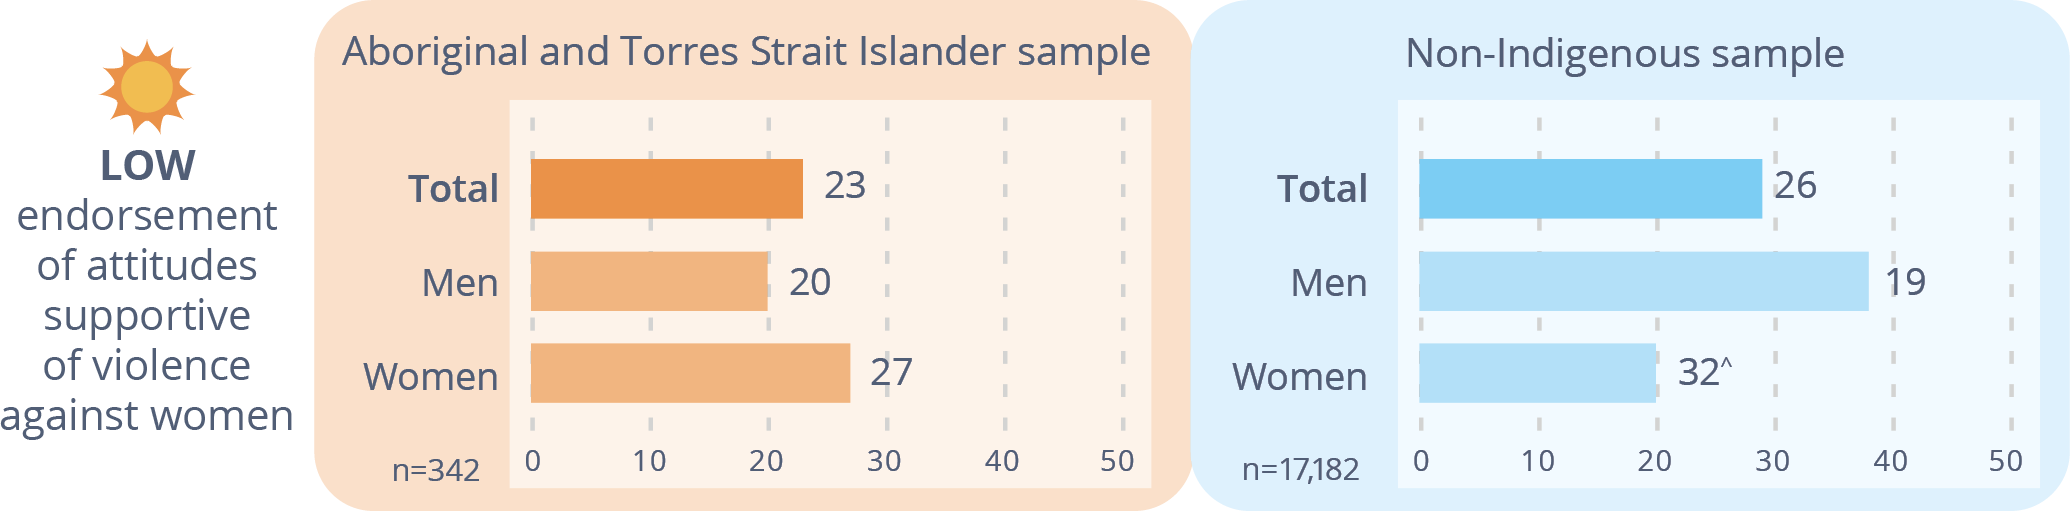 Figure 4-8: Relative attitudinal support for violence against women, Aboriginal and Torres Strait Islander and non-indigenous samples, 2017 (%) Data table below